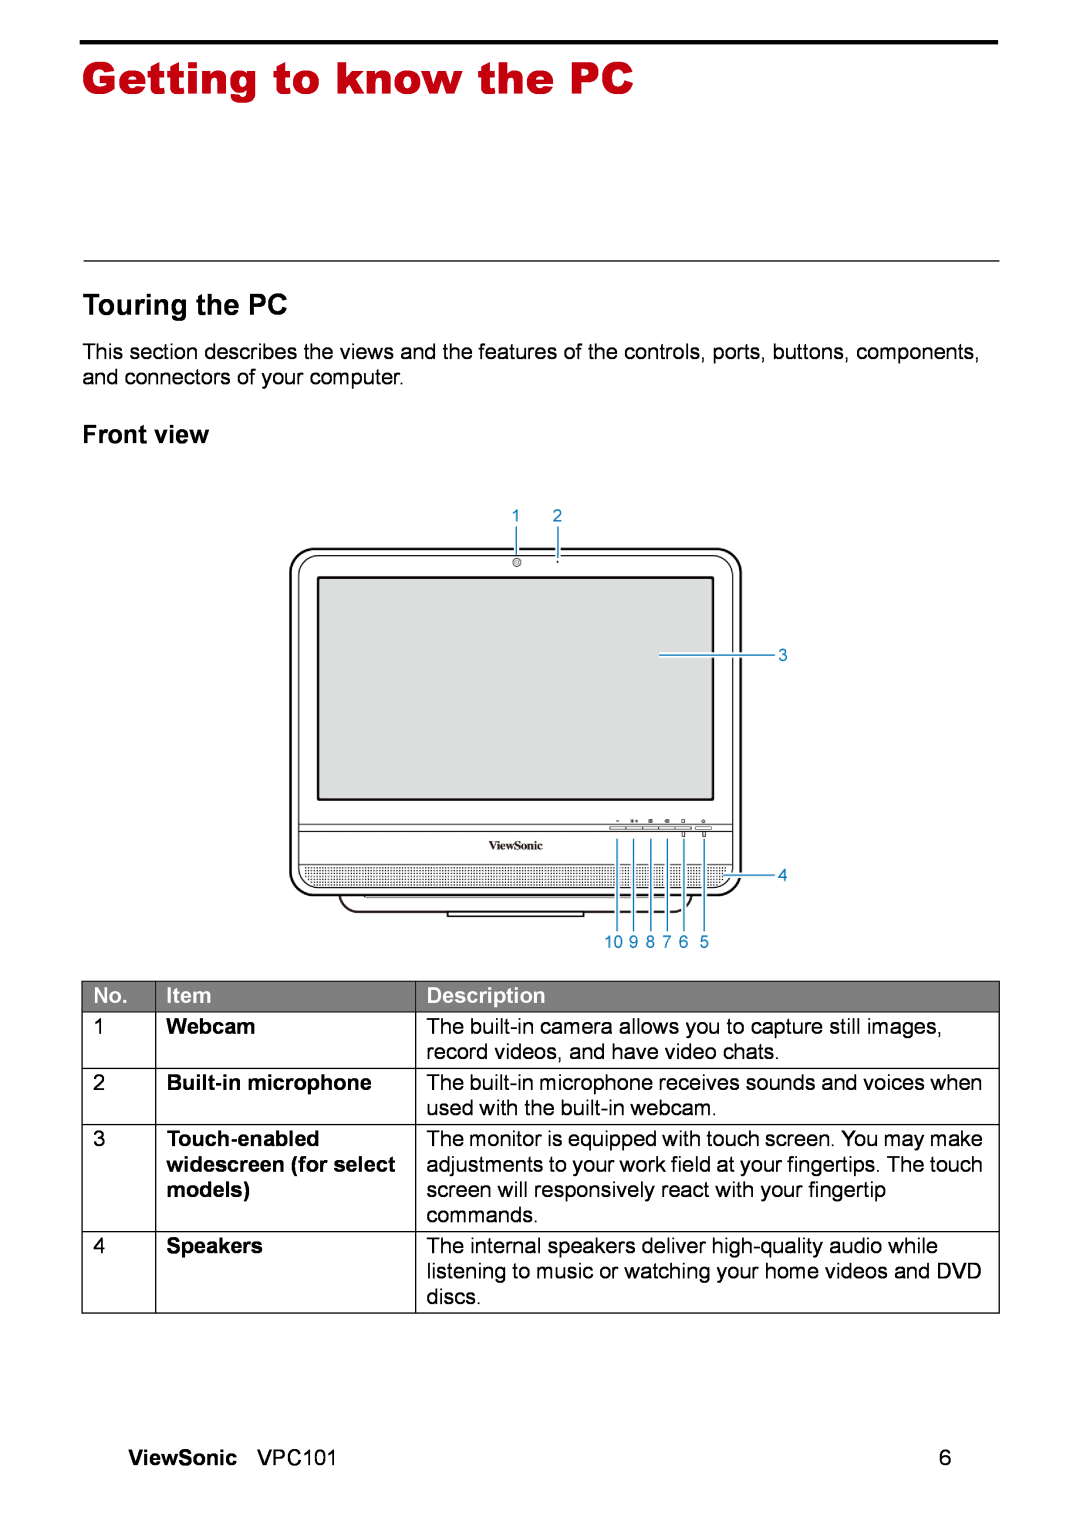 ViewSonic VPC101 manual Getting to know the PC, Touring the PC, Front view, Description 